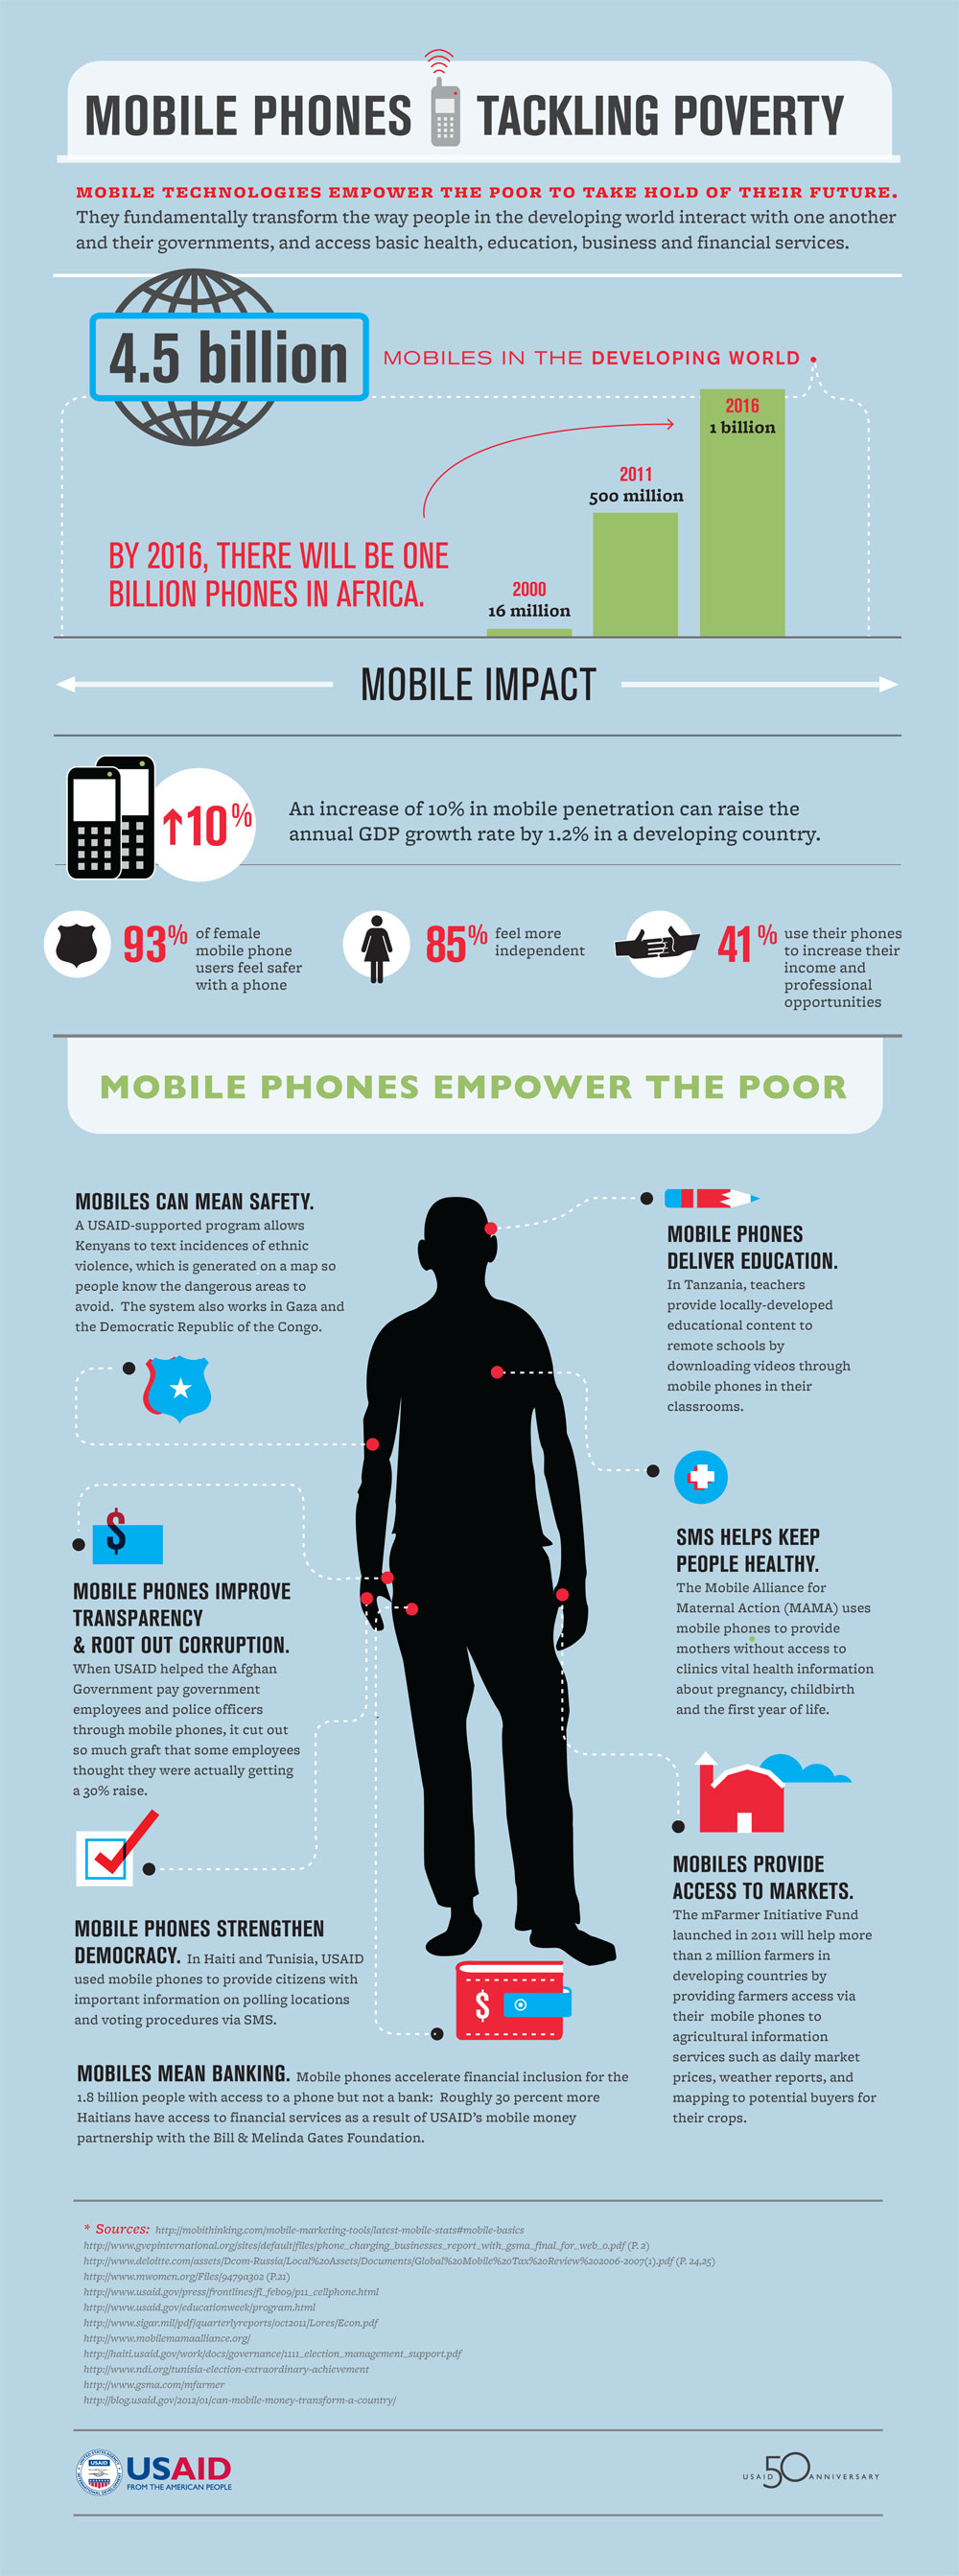 mobile phones tackling poverty, i didn't know my cell phone could do all these things, info graphic